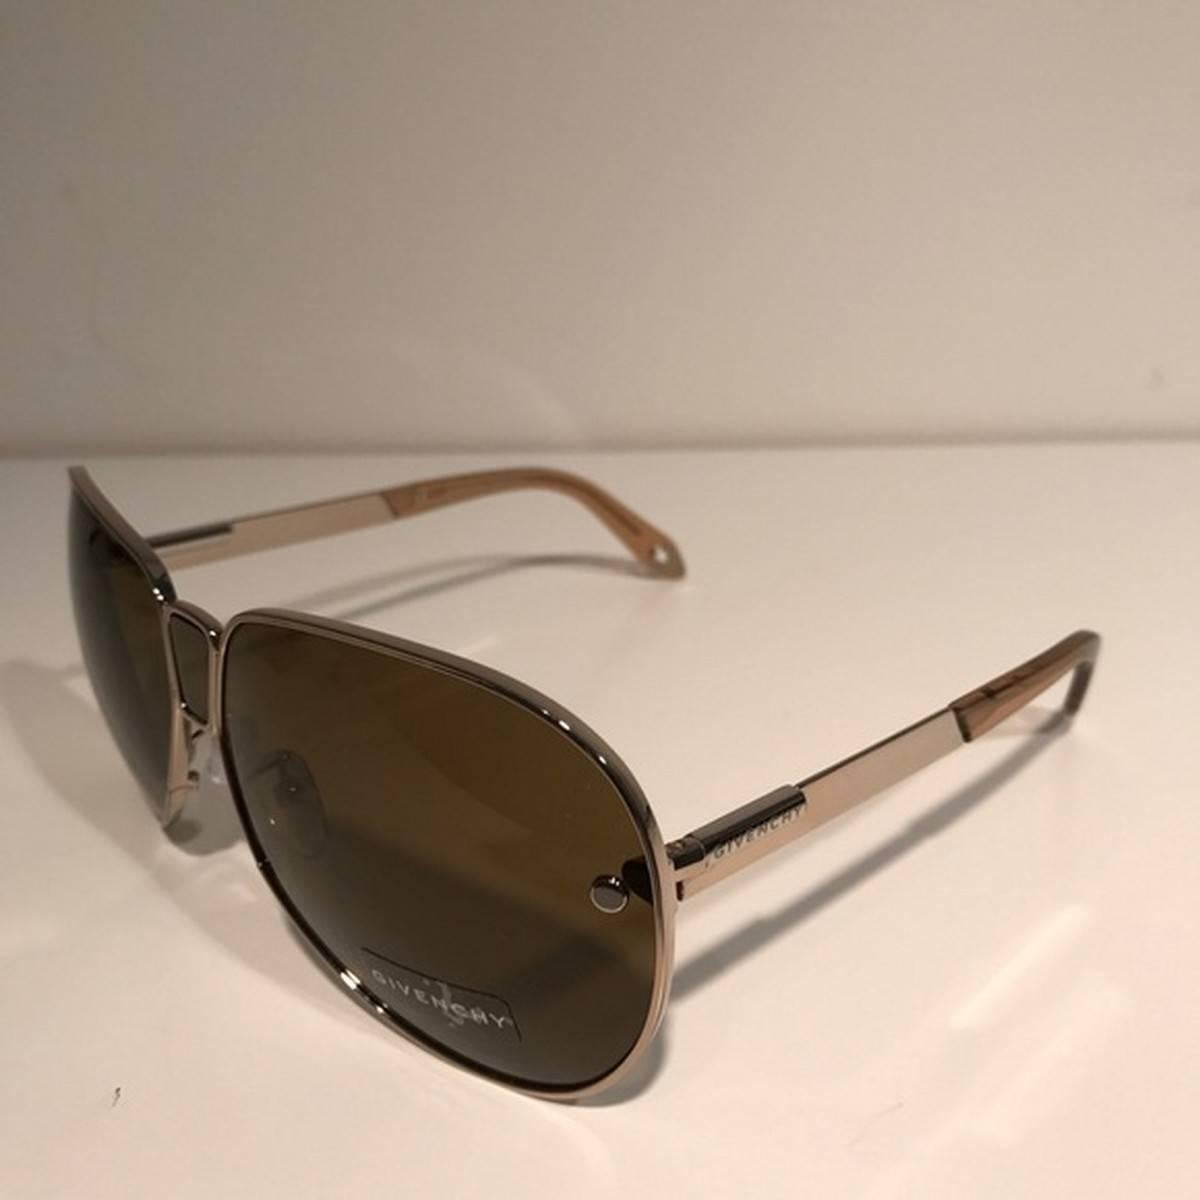 Givenchy Silver Aviator Sunglasses
Color: Silver/Brown
Size: OS

Brand new with box.
Unused condition.
No flaws.
Made in Italy.